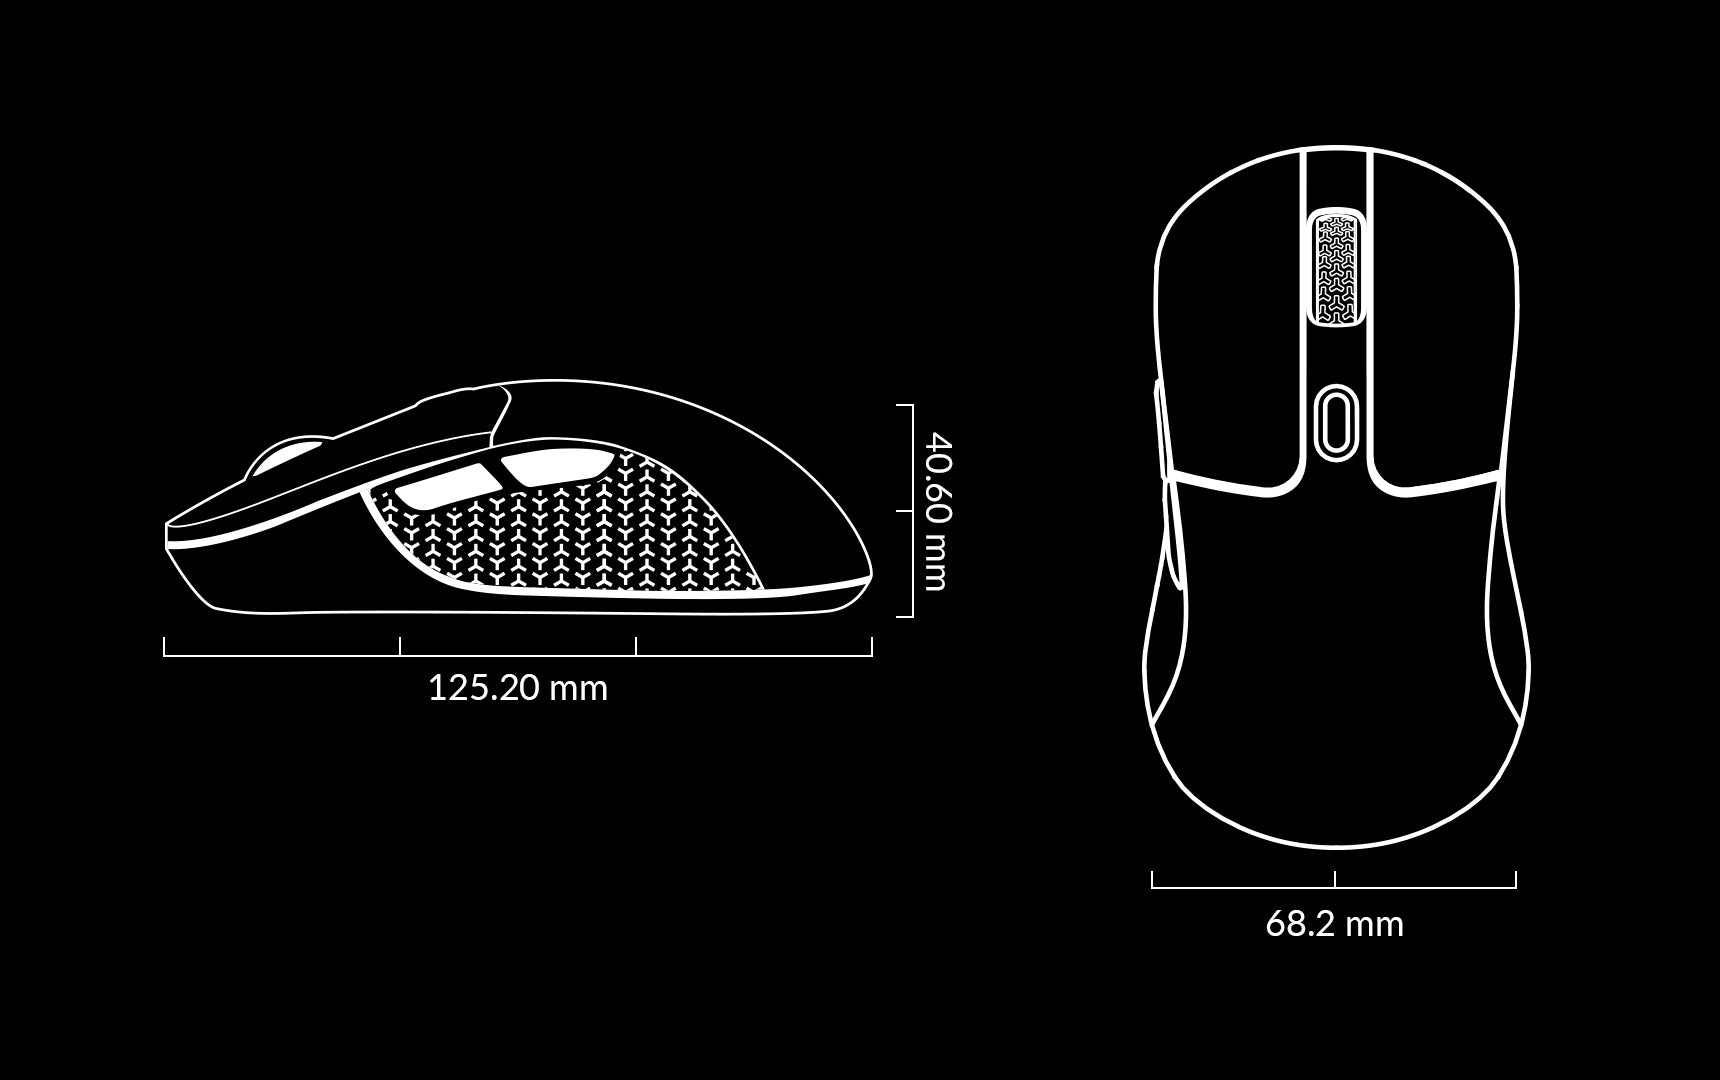 size of the Keychron M3 mouse